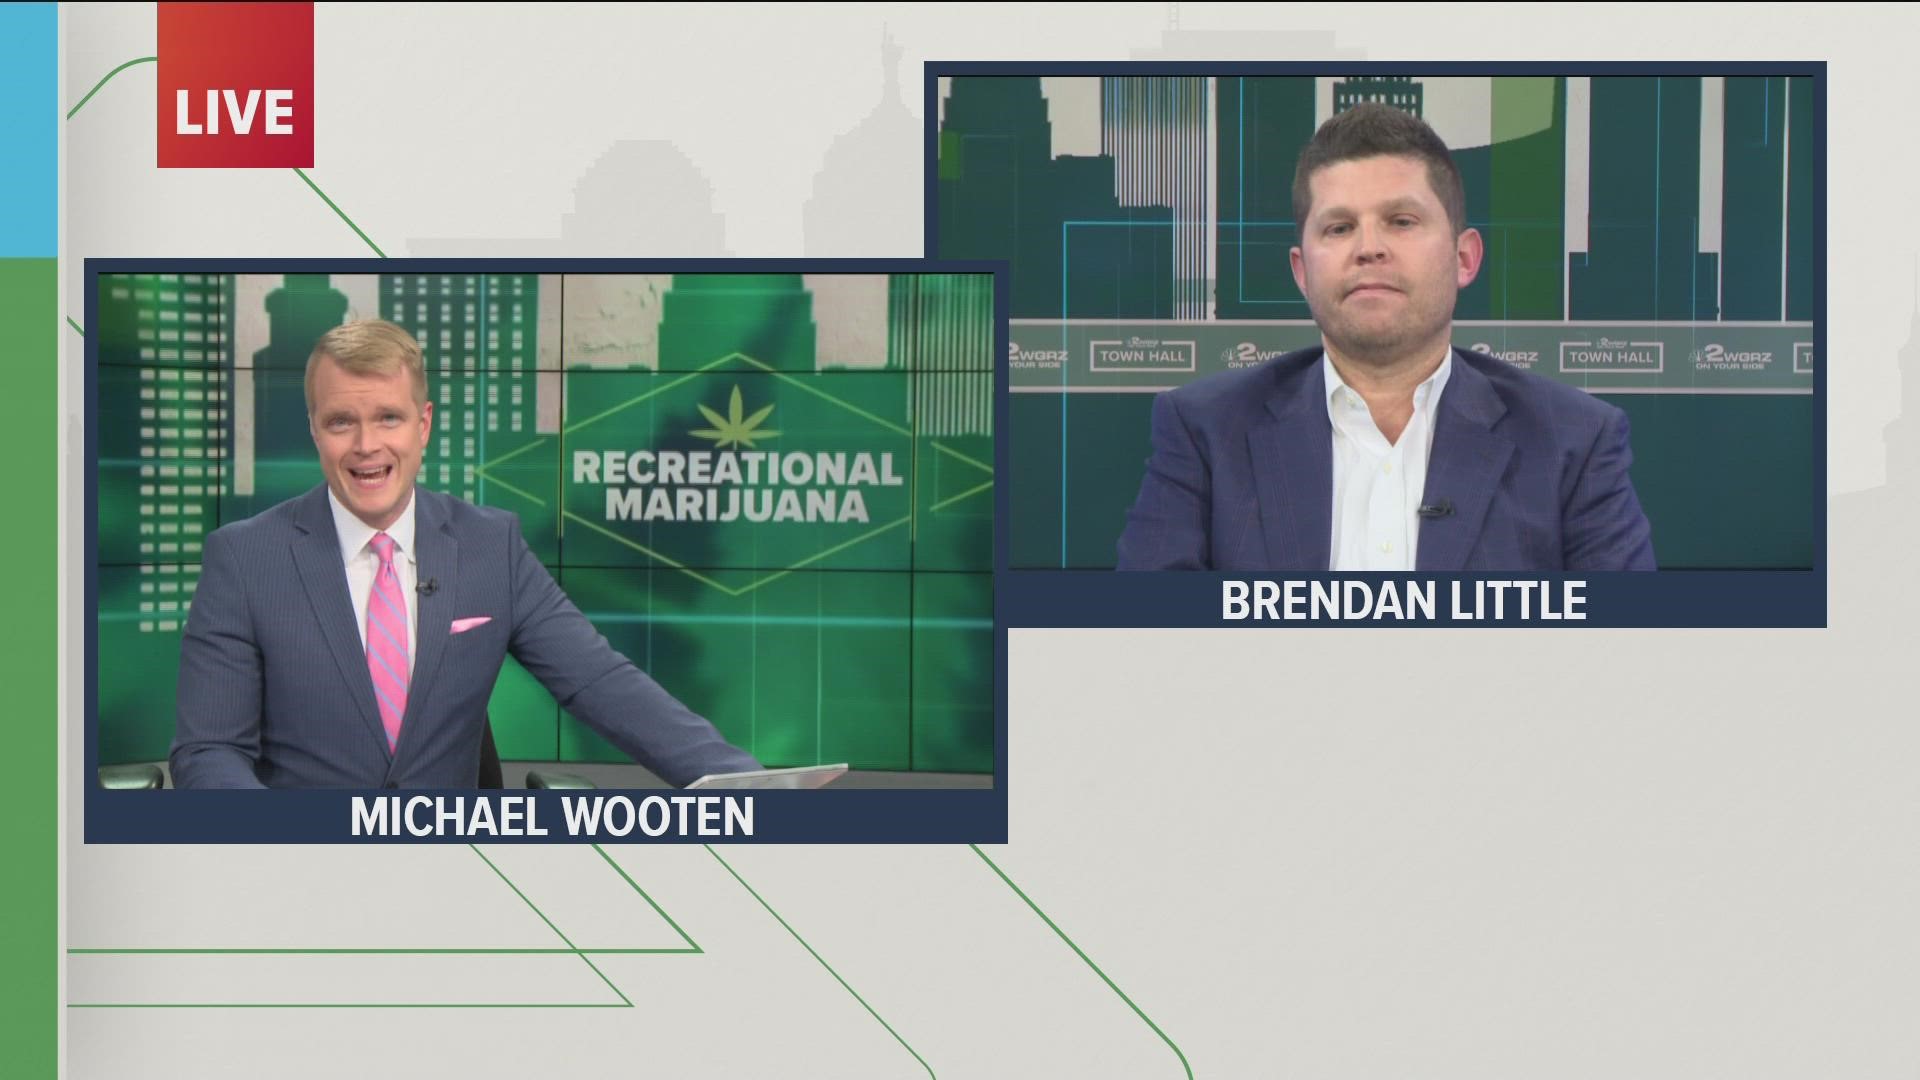 Brendan Little, a litigator at Lippes Matthias, provides some insight on the judge putting a hold on issuing cannabis licenses in New York.